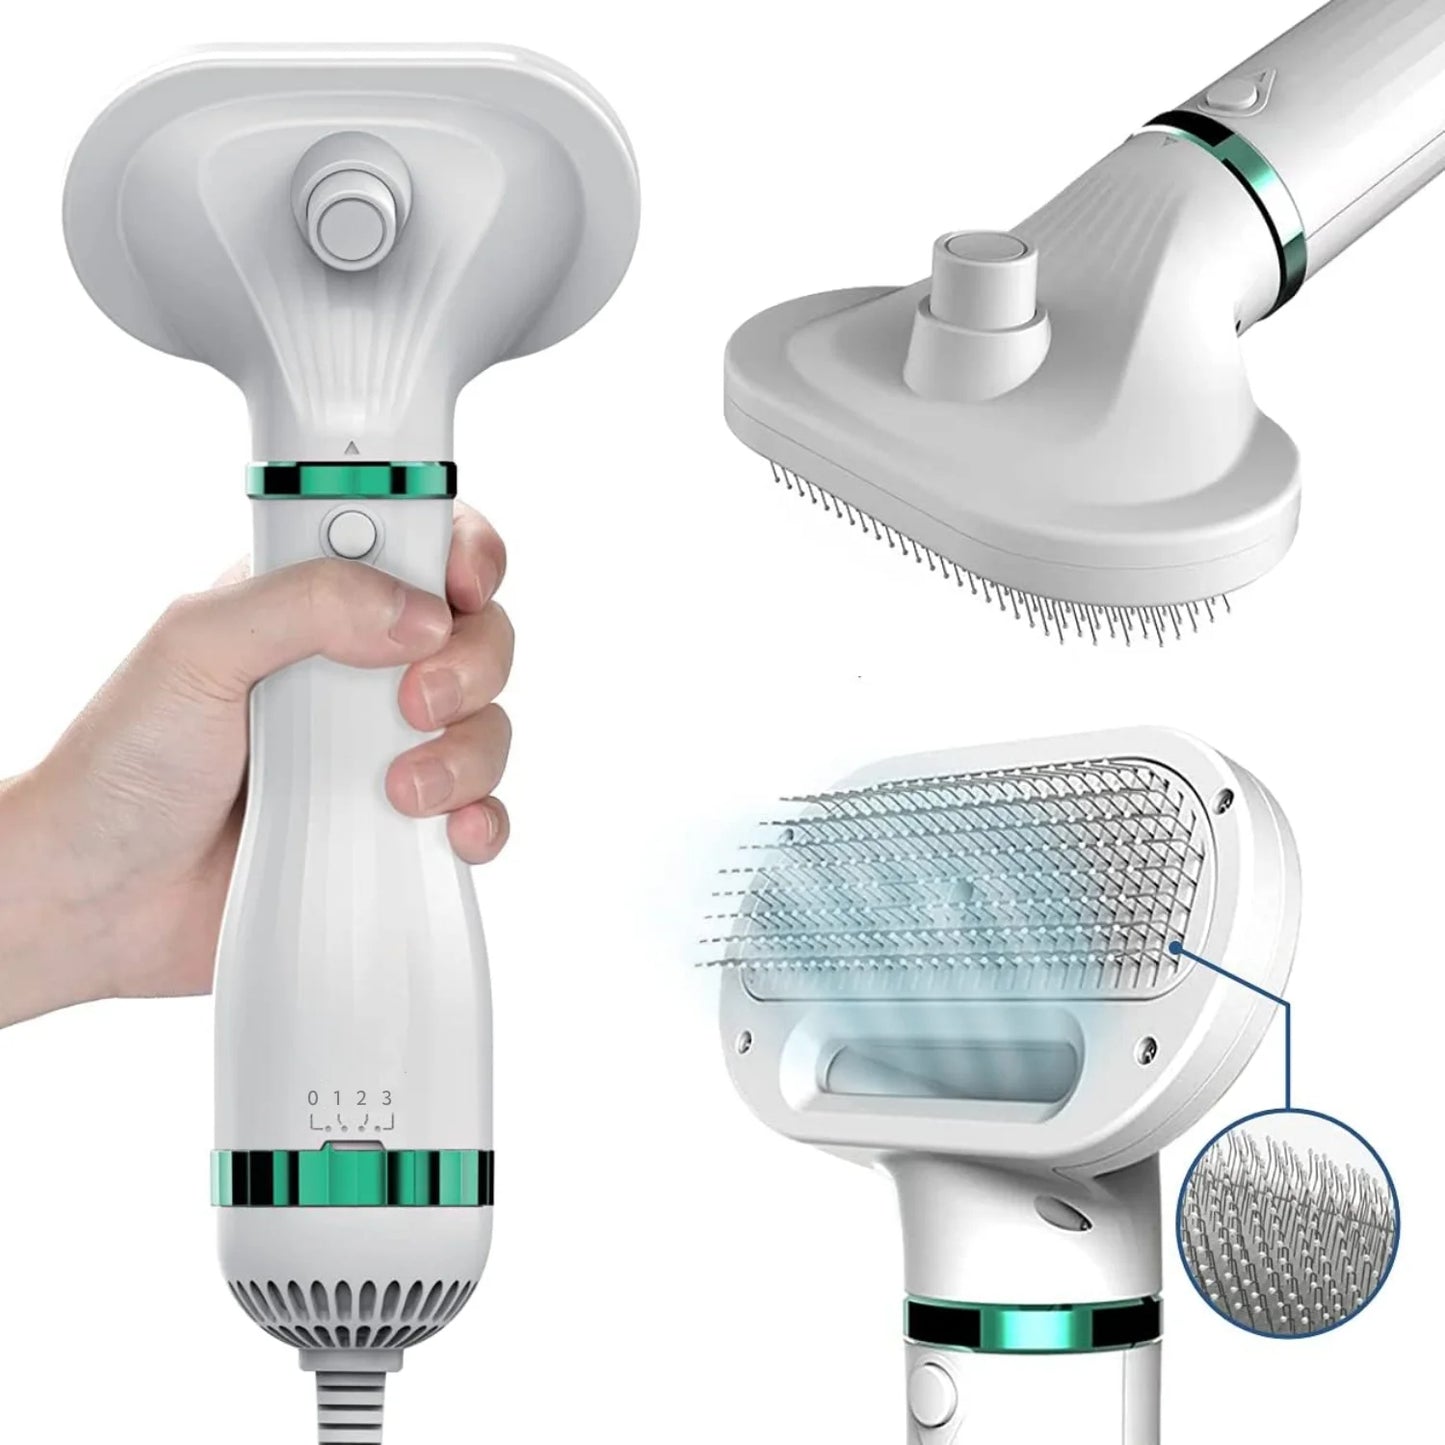 All-in-One Pet Dryer & Brush: Effortless Post-Bath Care